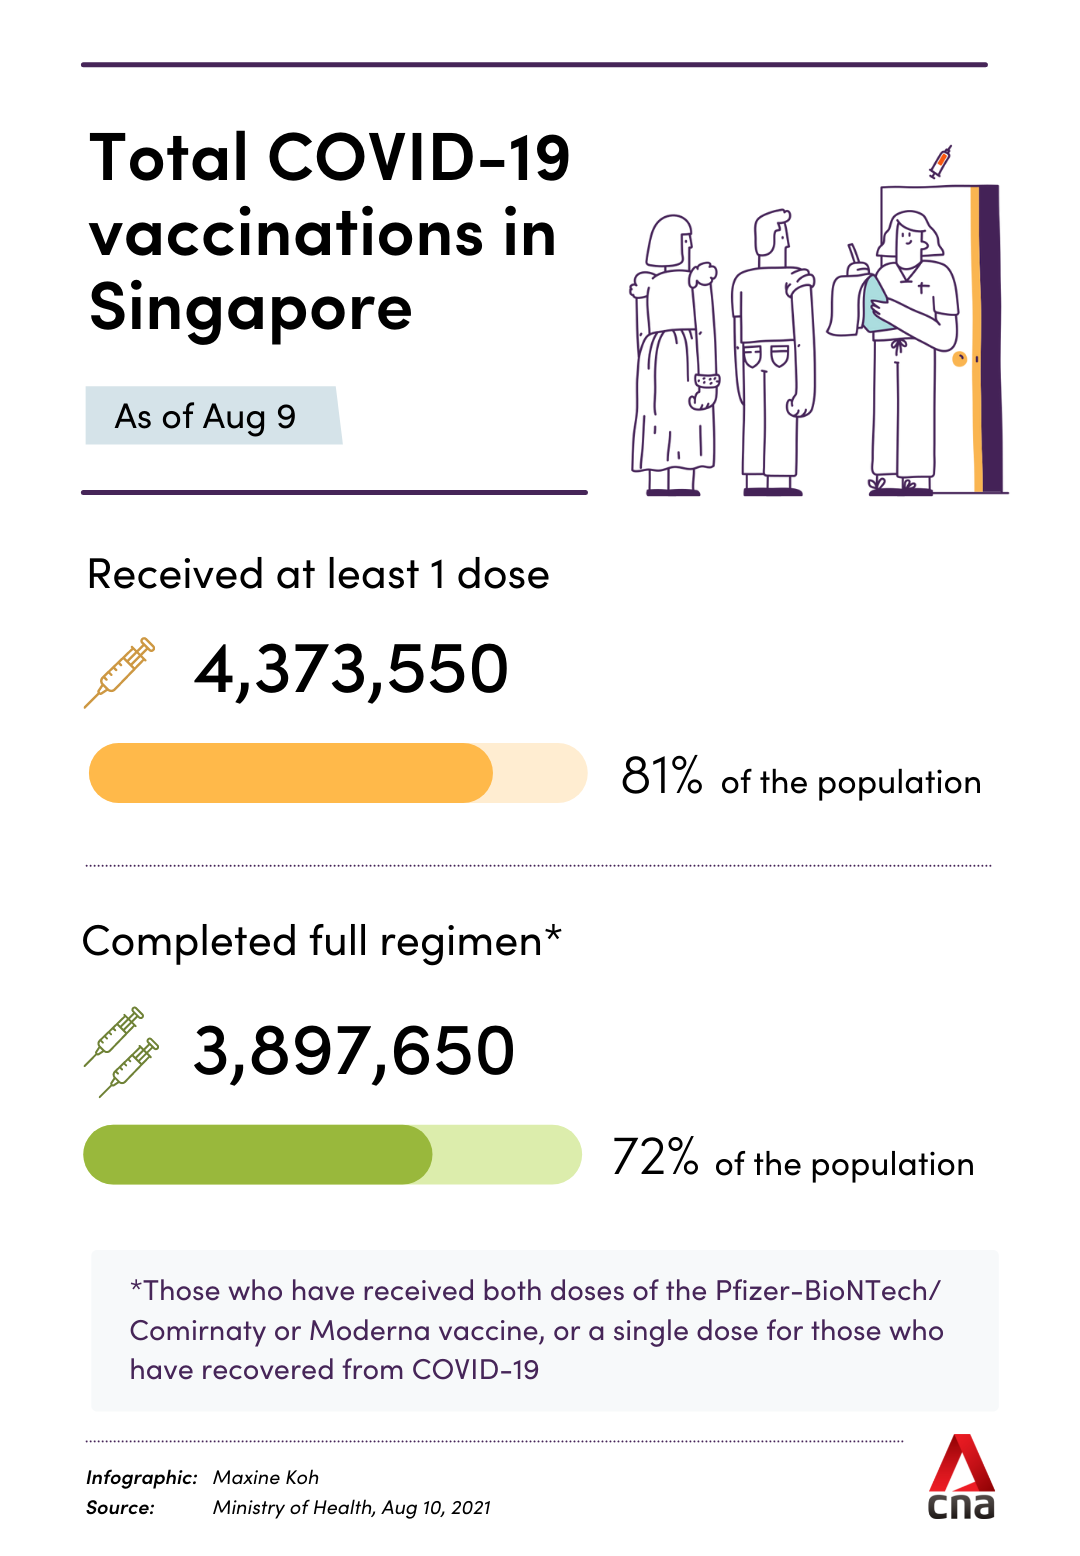 Total covid-19 vaccinations in Singapore as of Aug 9